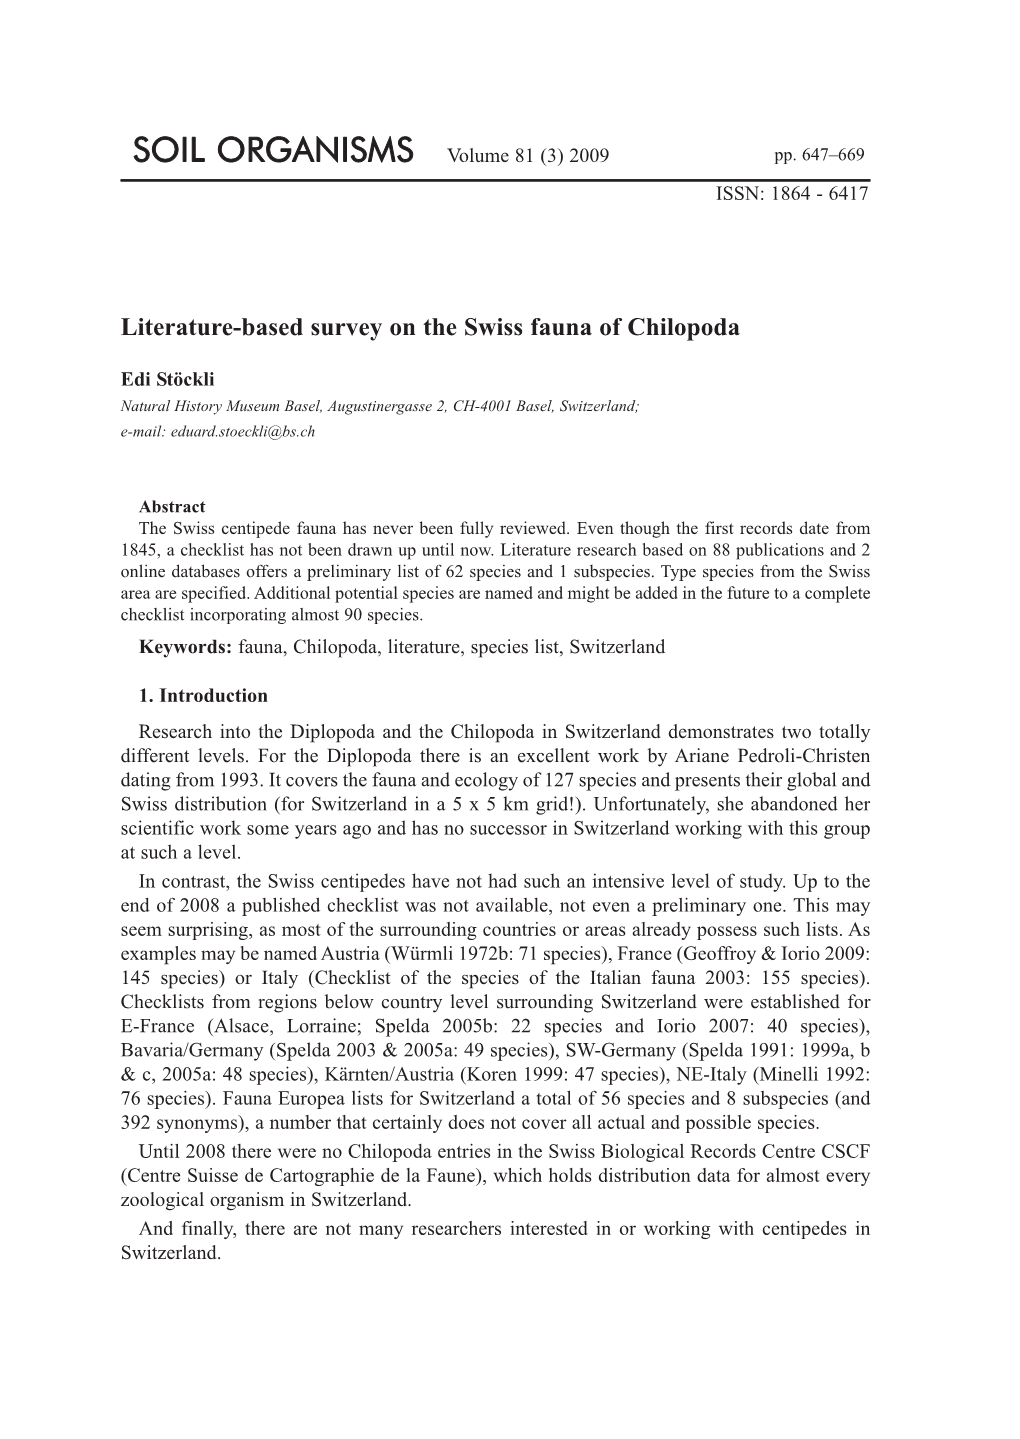 Literature-Based Survey on the Swiss Fauna of Chilopoda